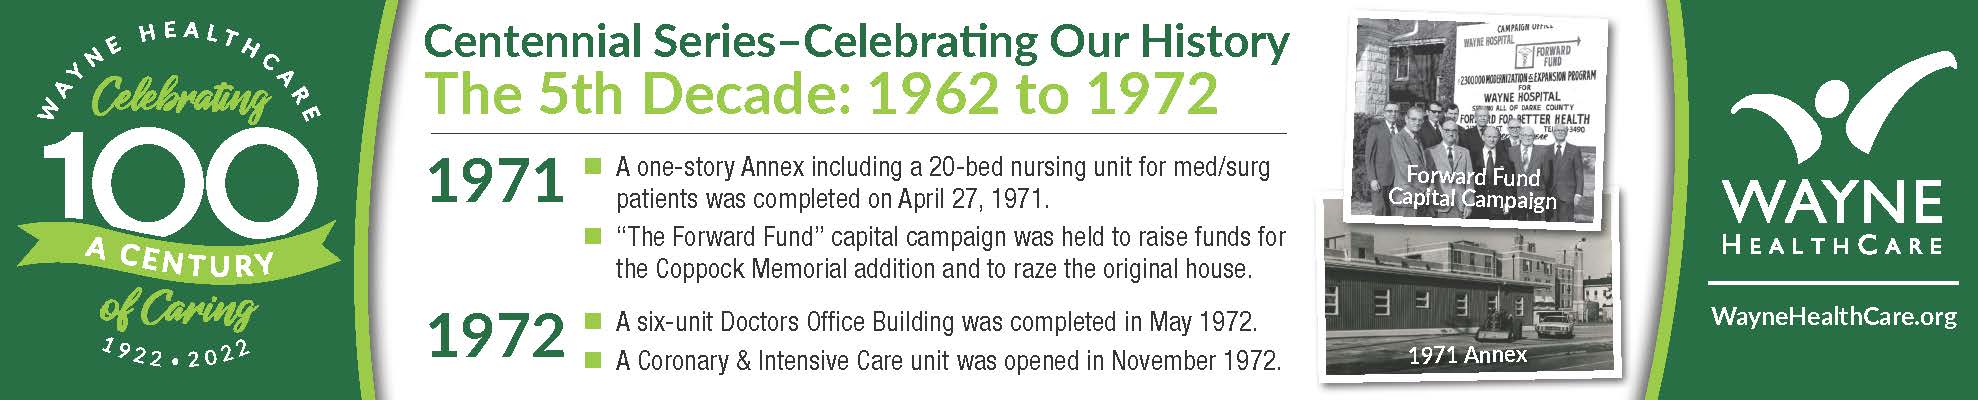 5th Decade Centennial  information about Wayne HealthCare picture of 1971 annex and forward fund capital campaign